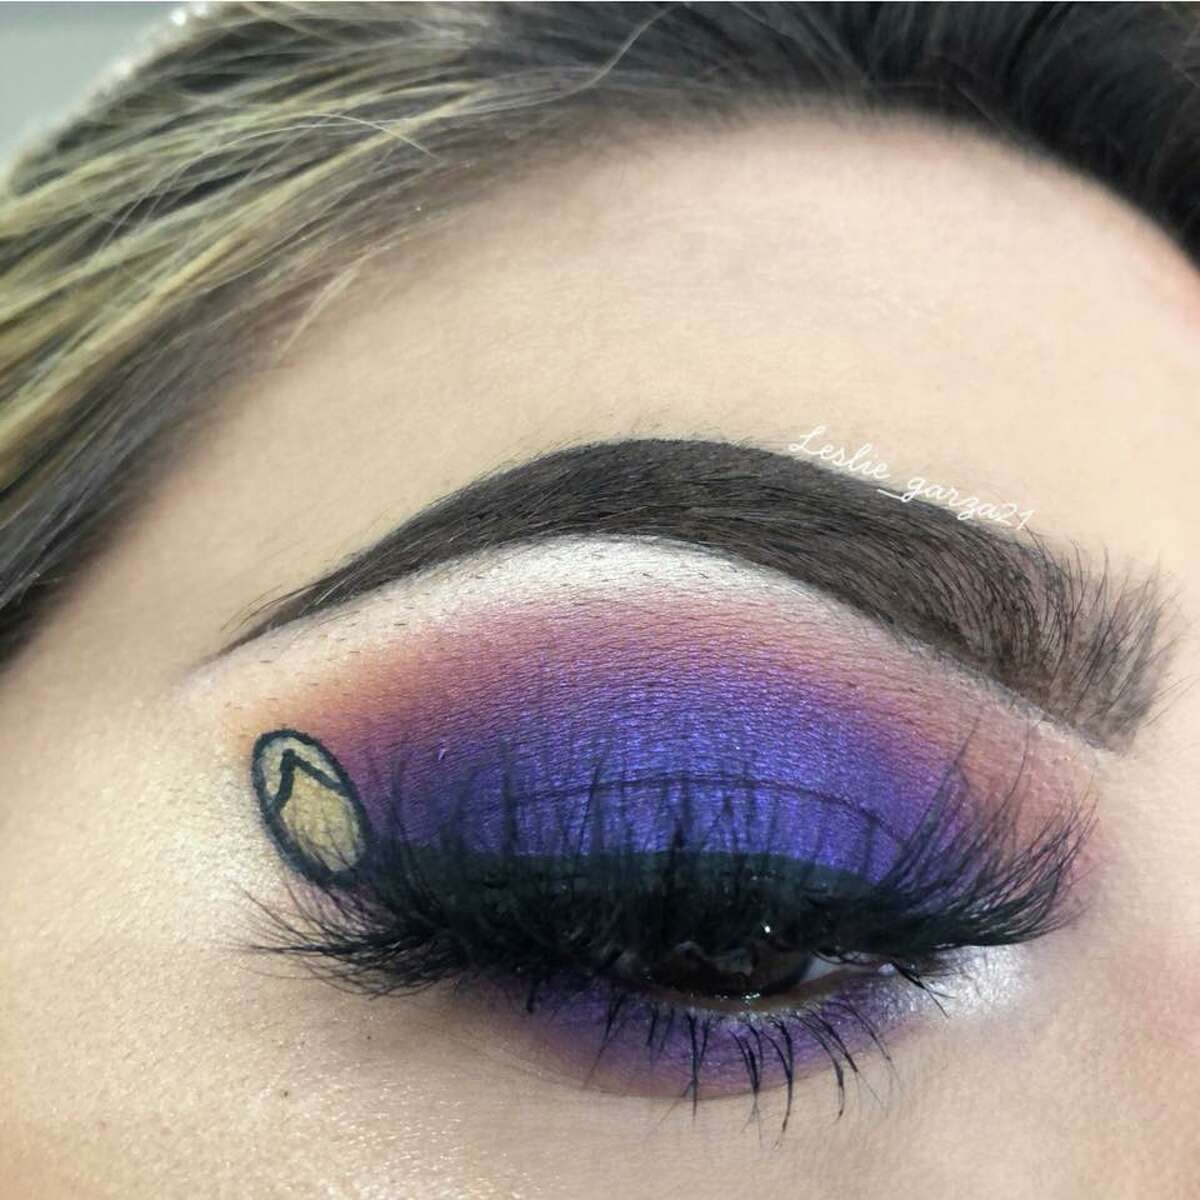 Leslie Garza, from San Antonio, says makeup is her hobby. While brainstorming content for her Facebook and Instagram pages, she came up with the idea to incorporate her childhood enemy, la chancla, into a Mother's Day-themed eyeshadow design.